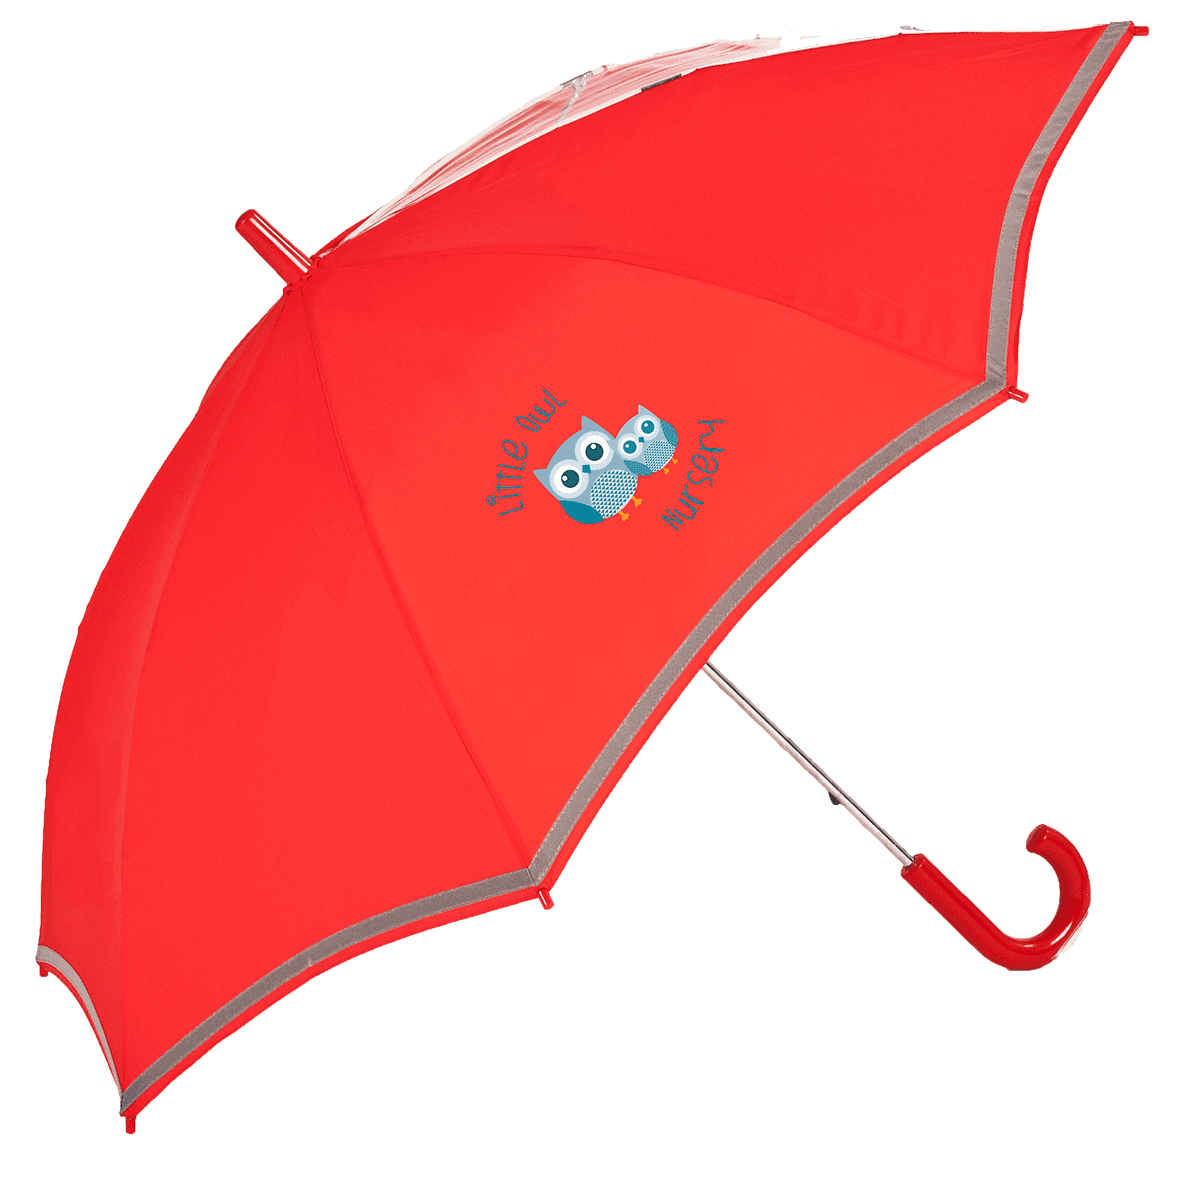 Krazy Kids Umbrella - Promotions Only Group Limited